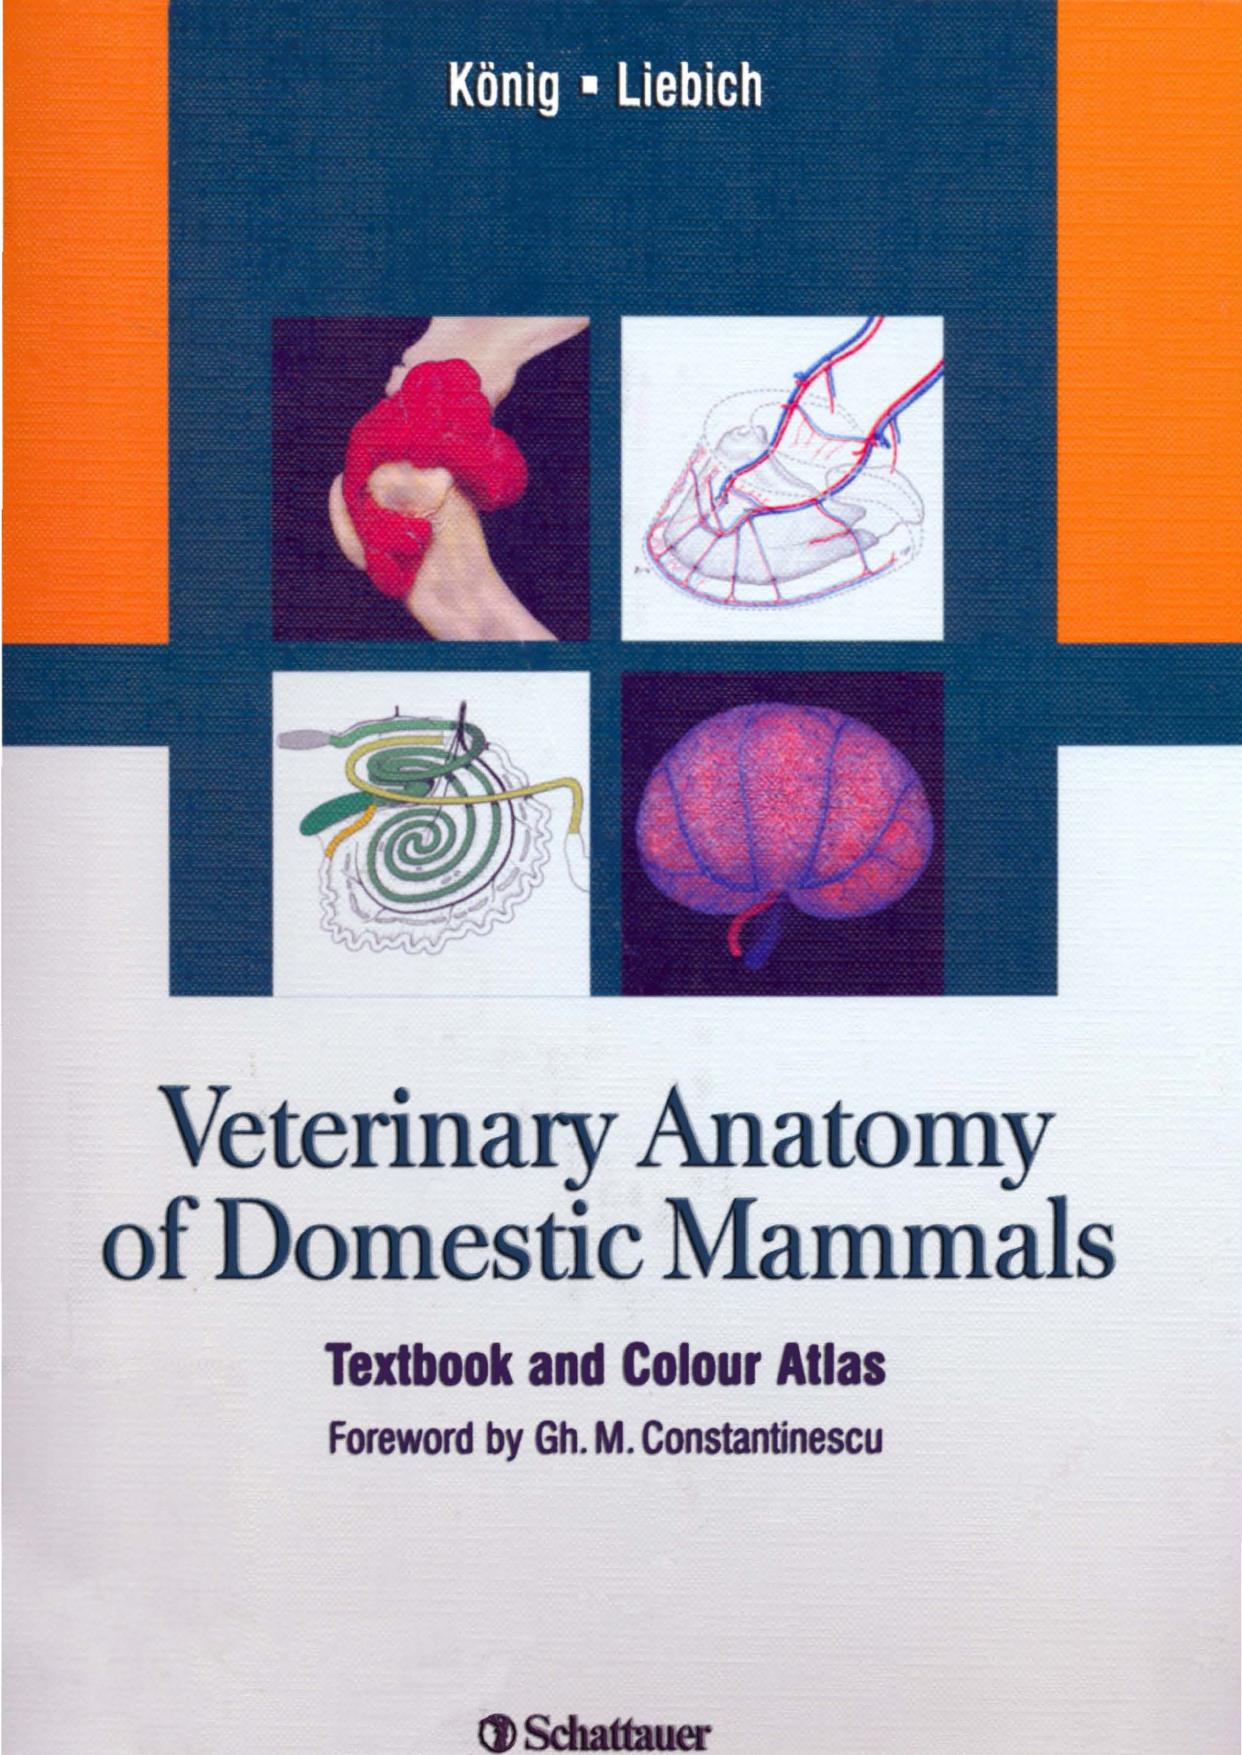 Veterinary Anatomy of Domestic Mammals, Textbook and Colour Atlas (2004)